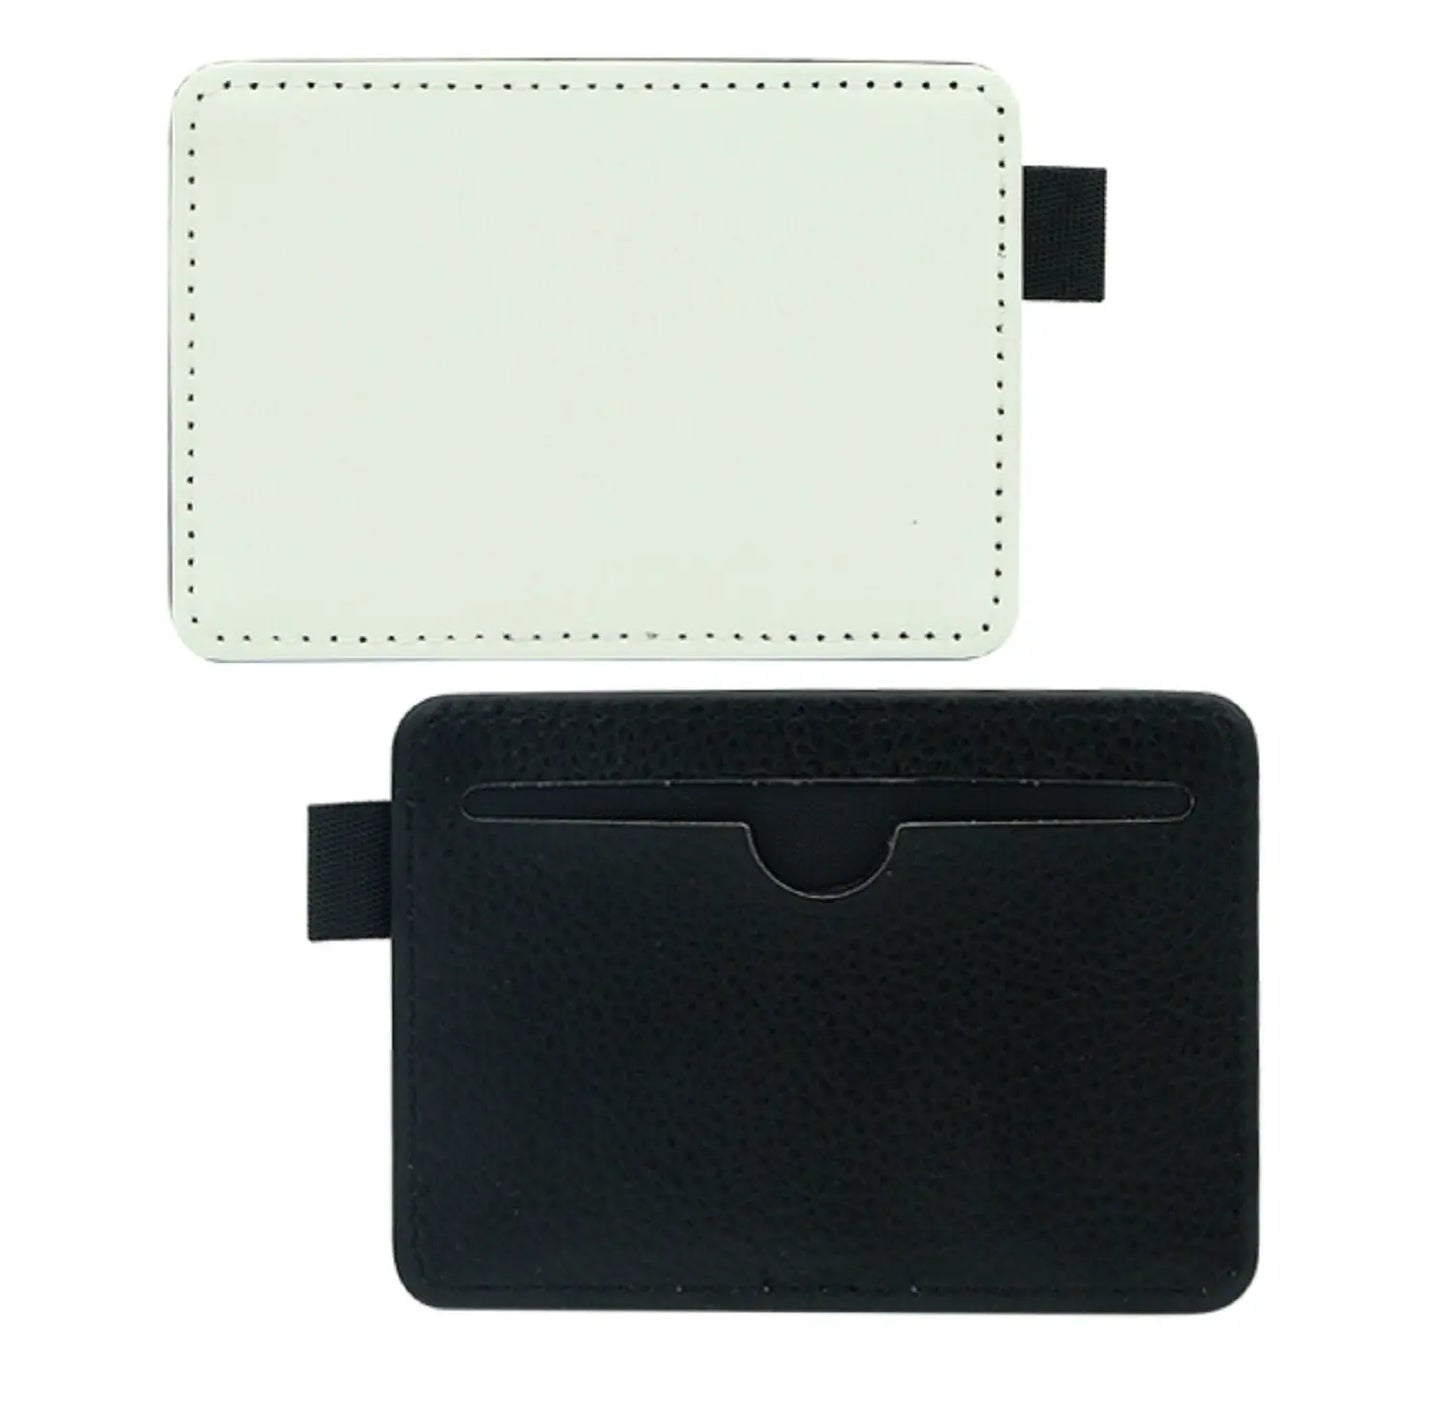 Personalized PU Leather 1-2 cards holder - Sunday's Creative